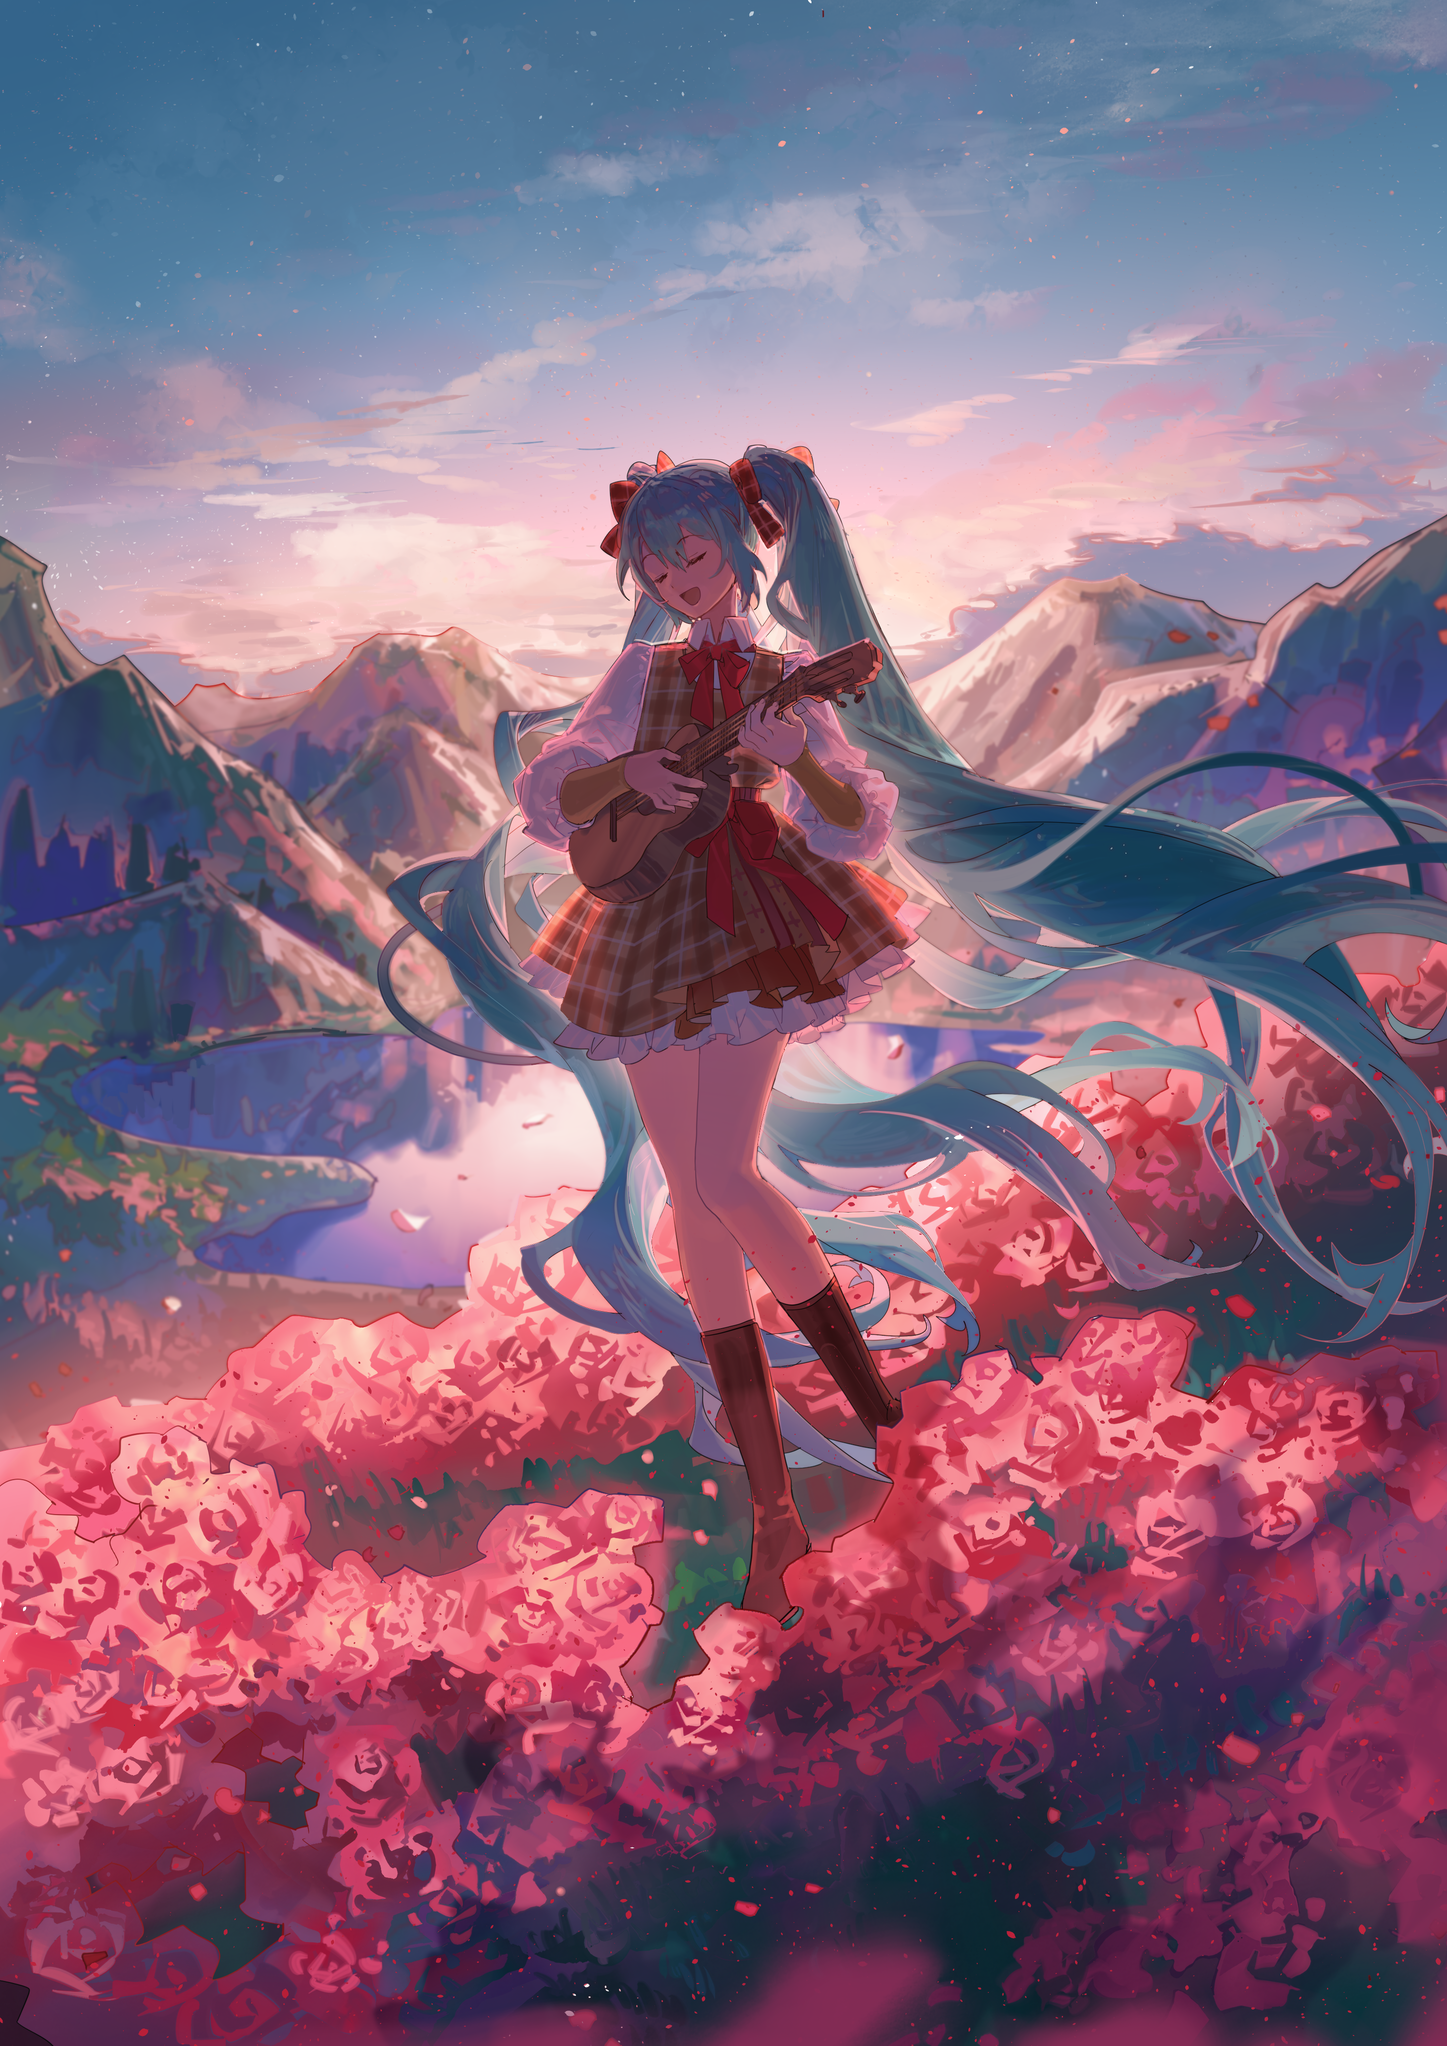 Anime 1447x2046 anime Pixiv anime girls Vocaloid Hatsune Miku mountains closed eyes twintails blue hair portrait display sunset sunset glow sky clouds flowers water reflection frills musical instrument ukulele Shuno (artist)